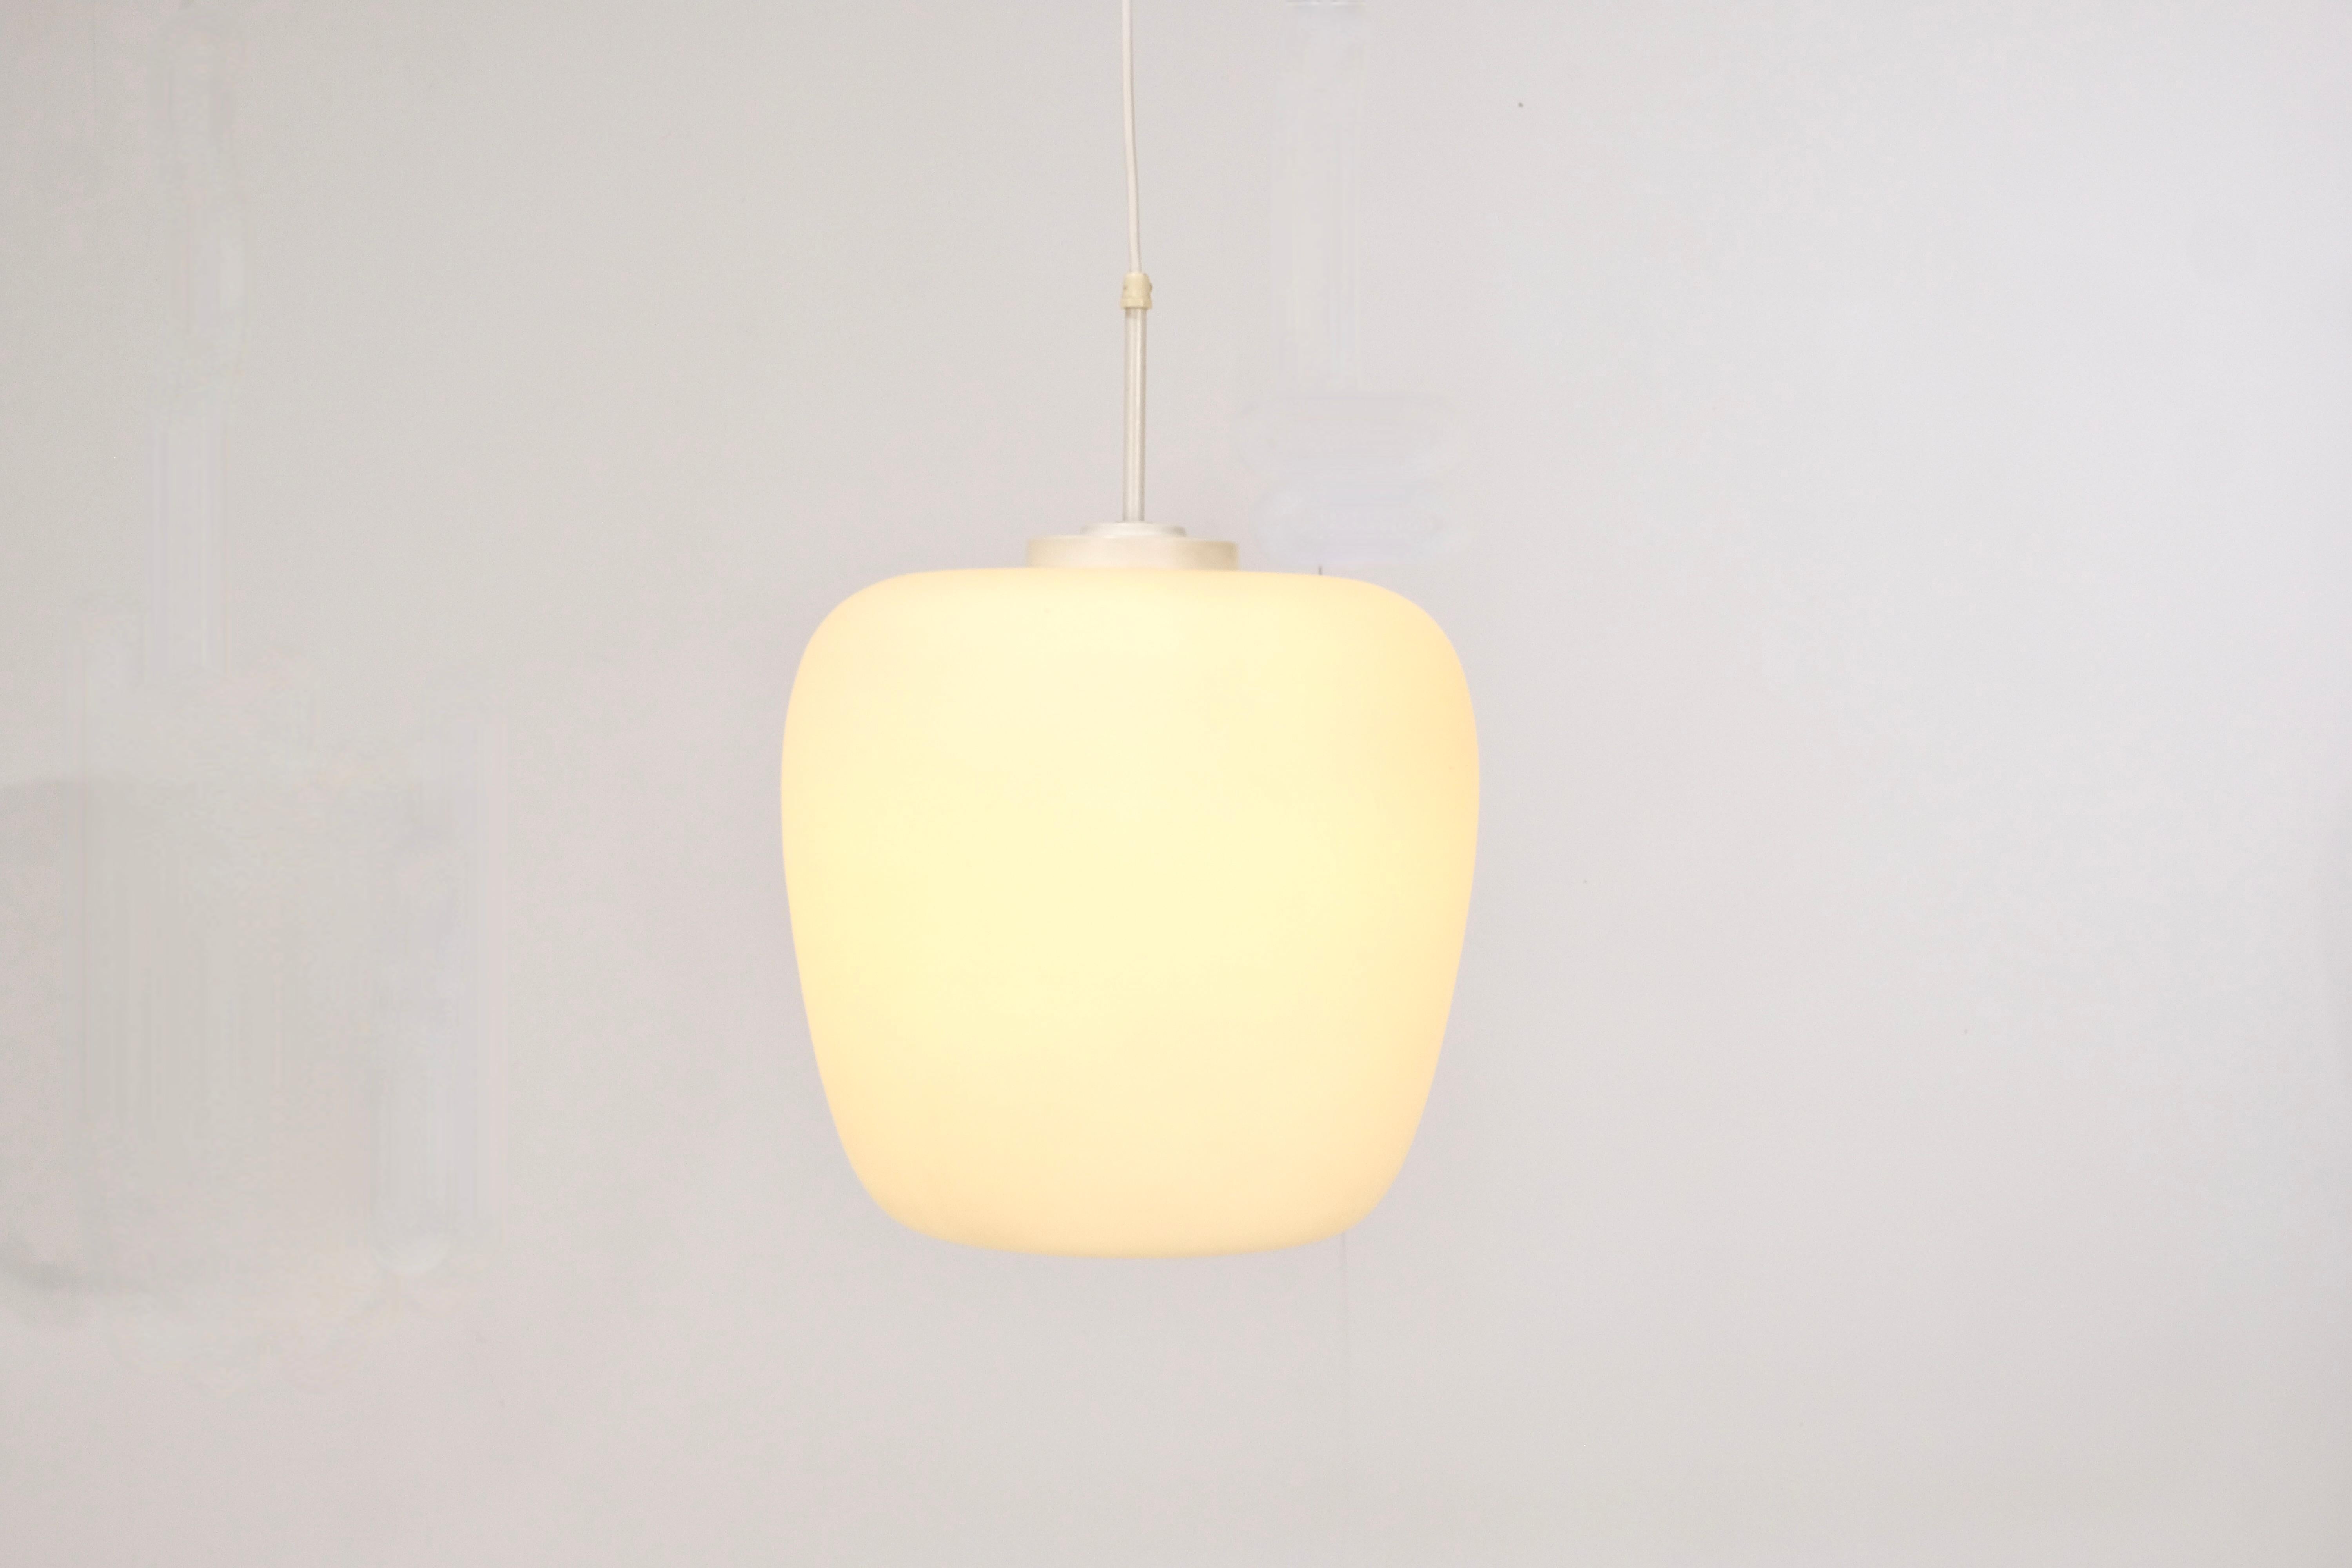 Great pendant lamp in the style of 